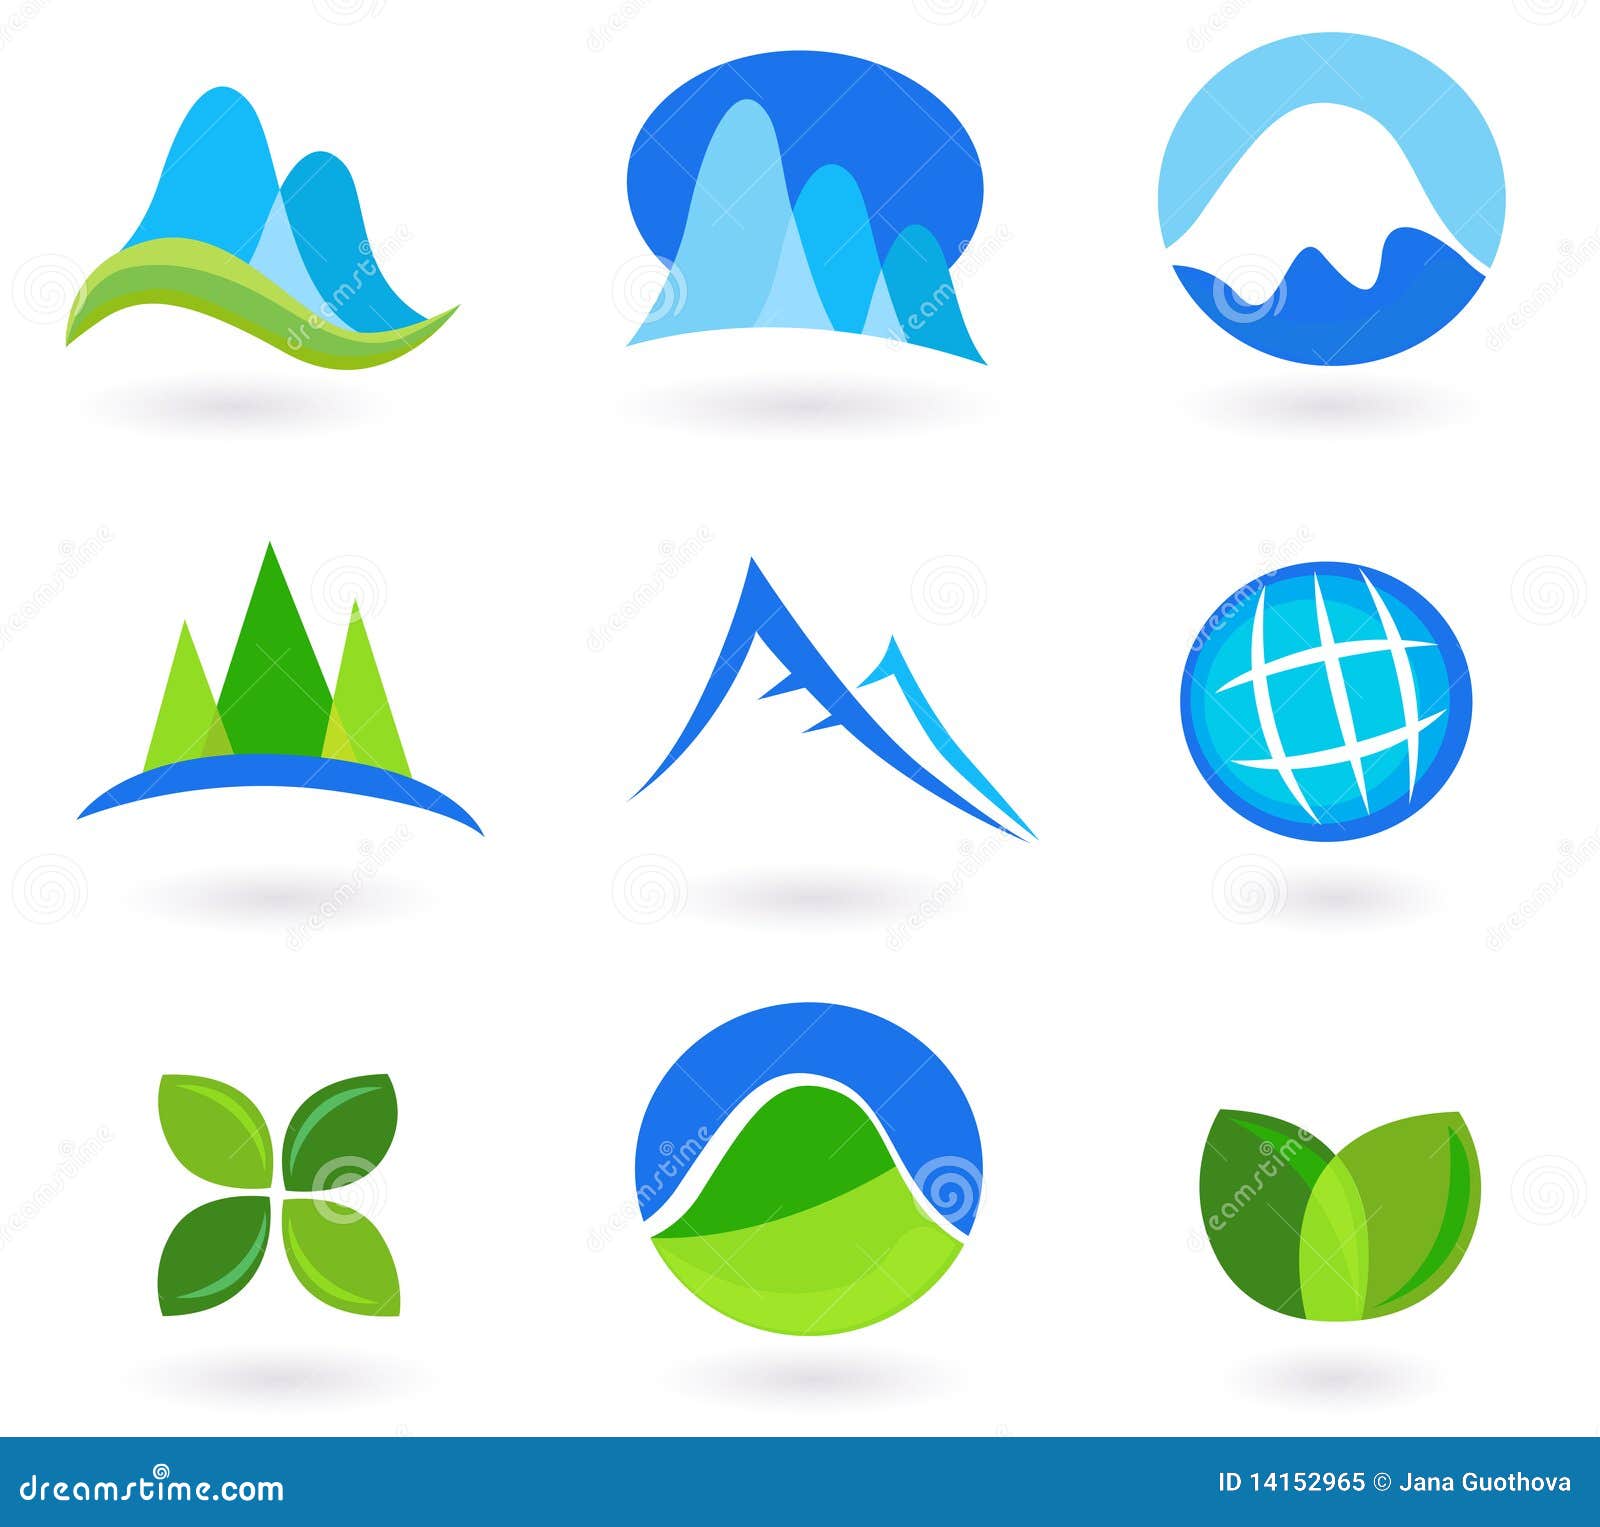 nature, mountain and turism icons - blue and green